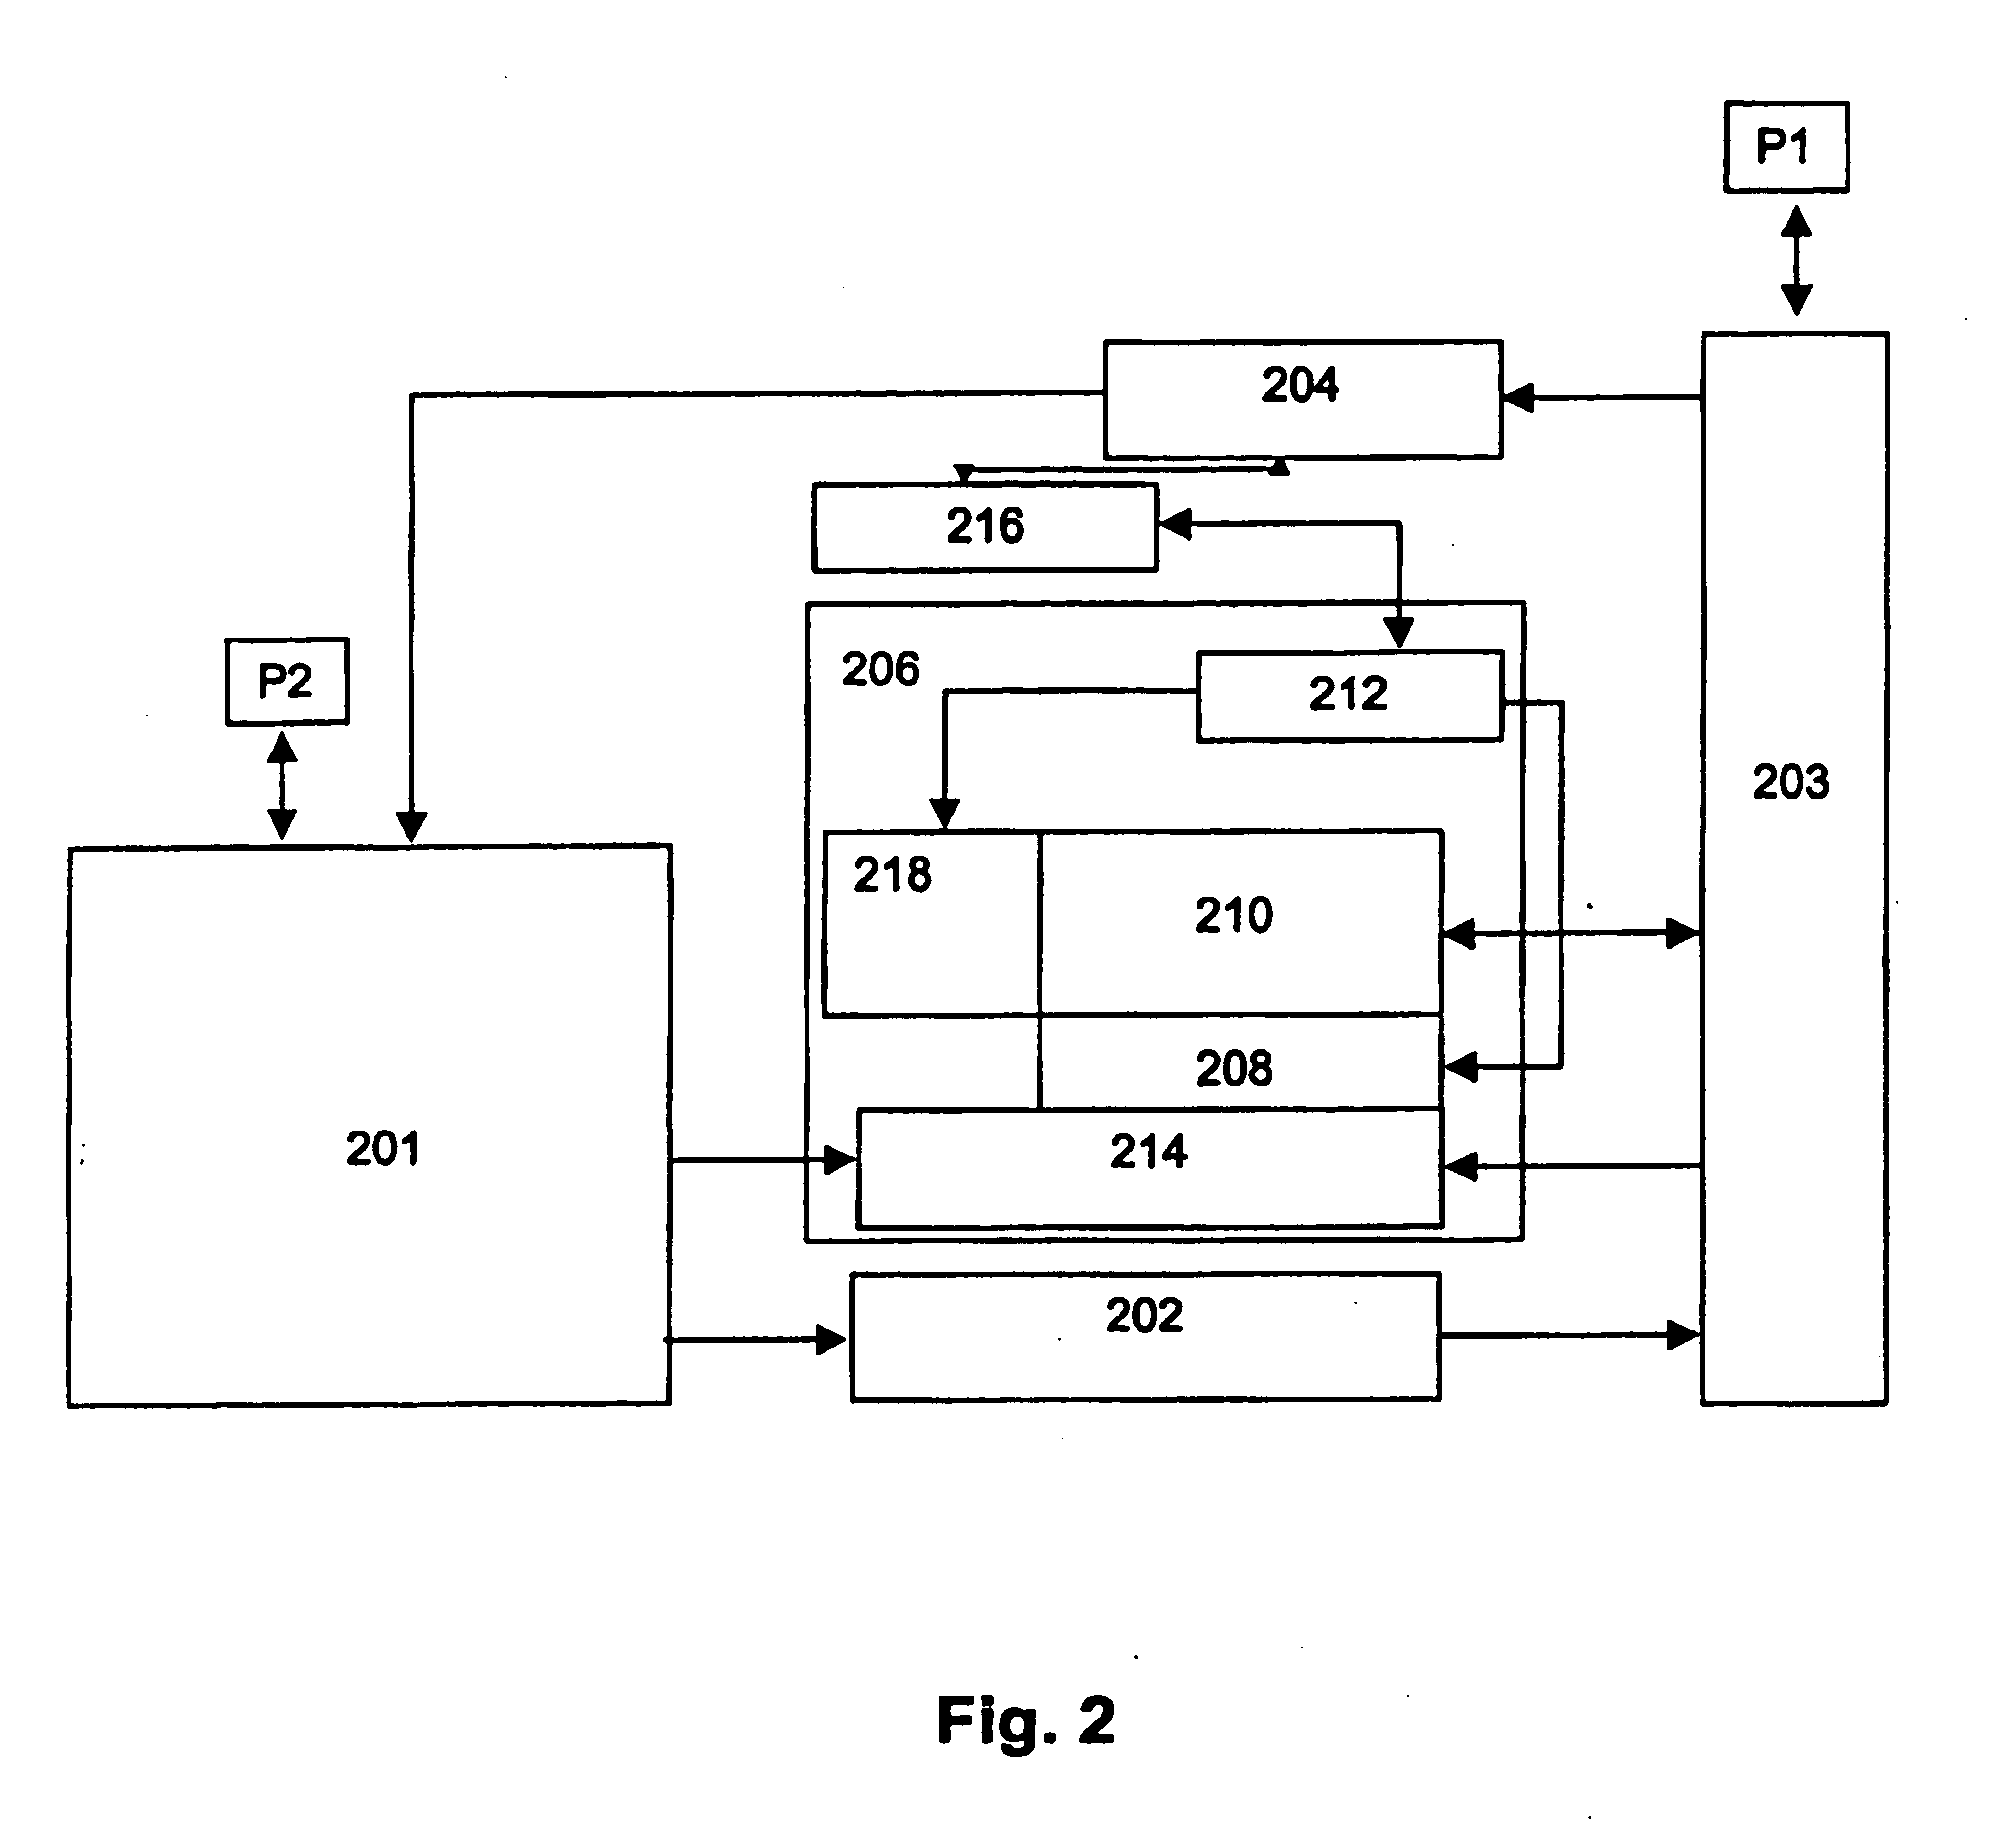 Method, computer system and computer program product for executing a network supported business transaction